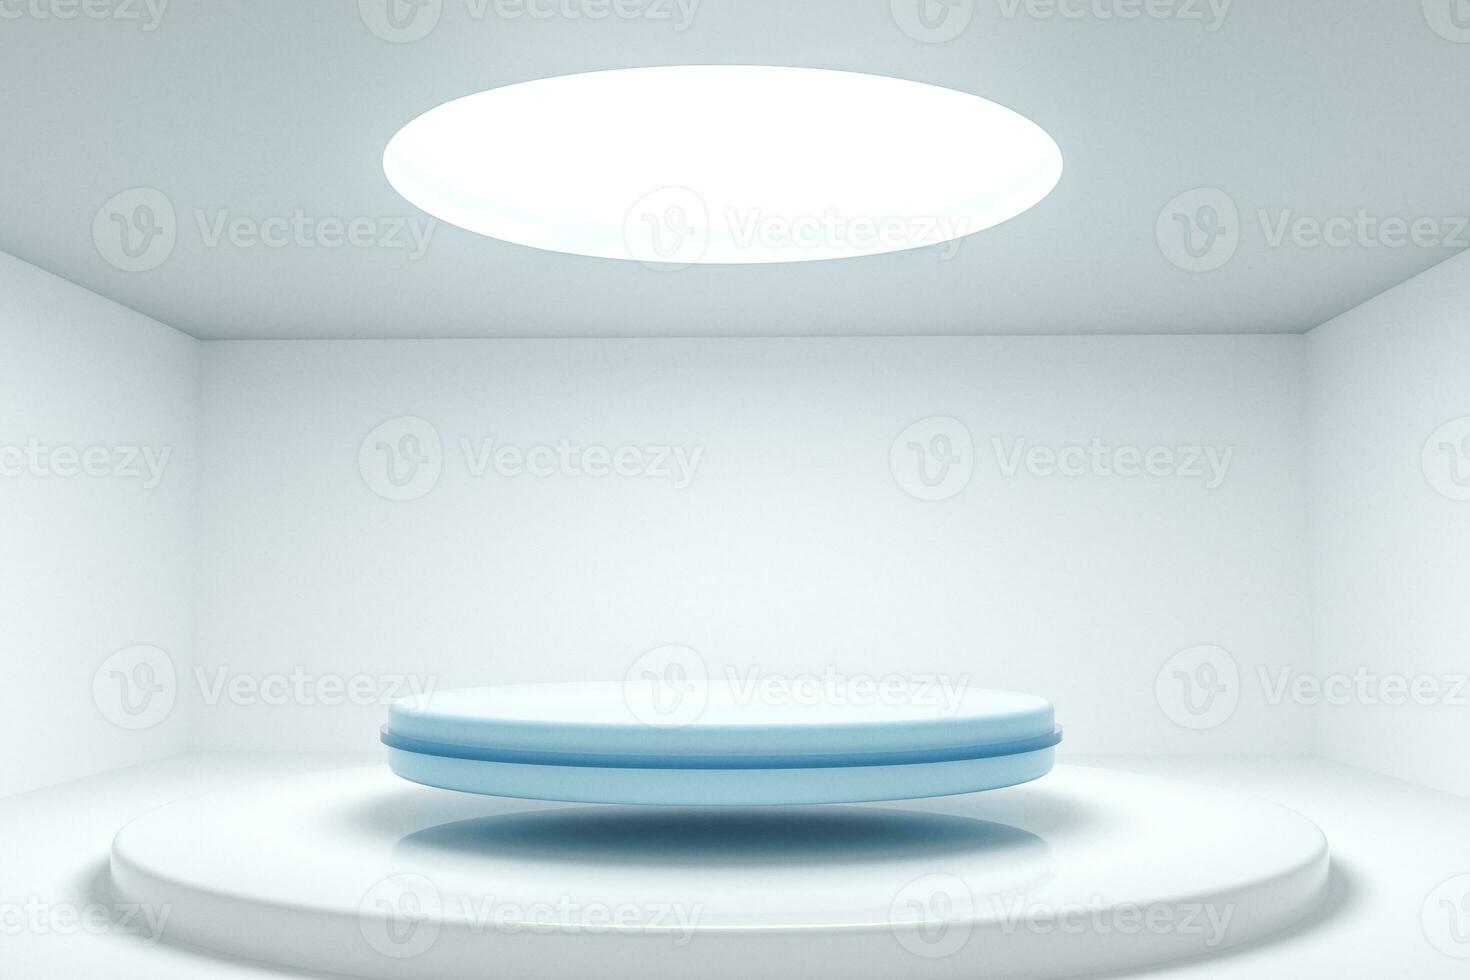 3d rendering, the round platform in the empty room. photo